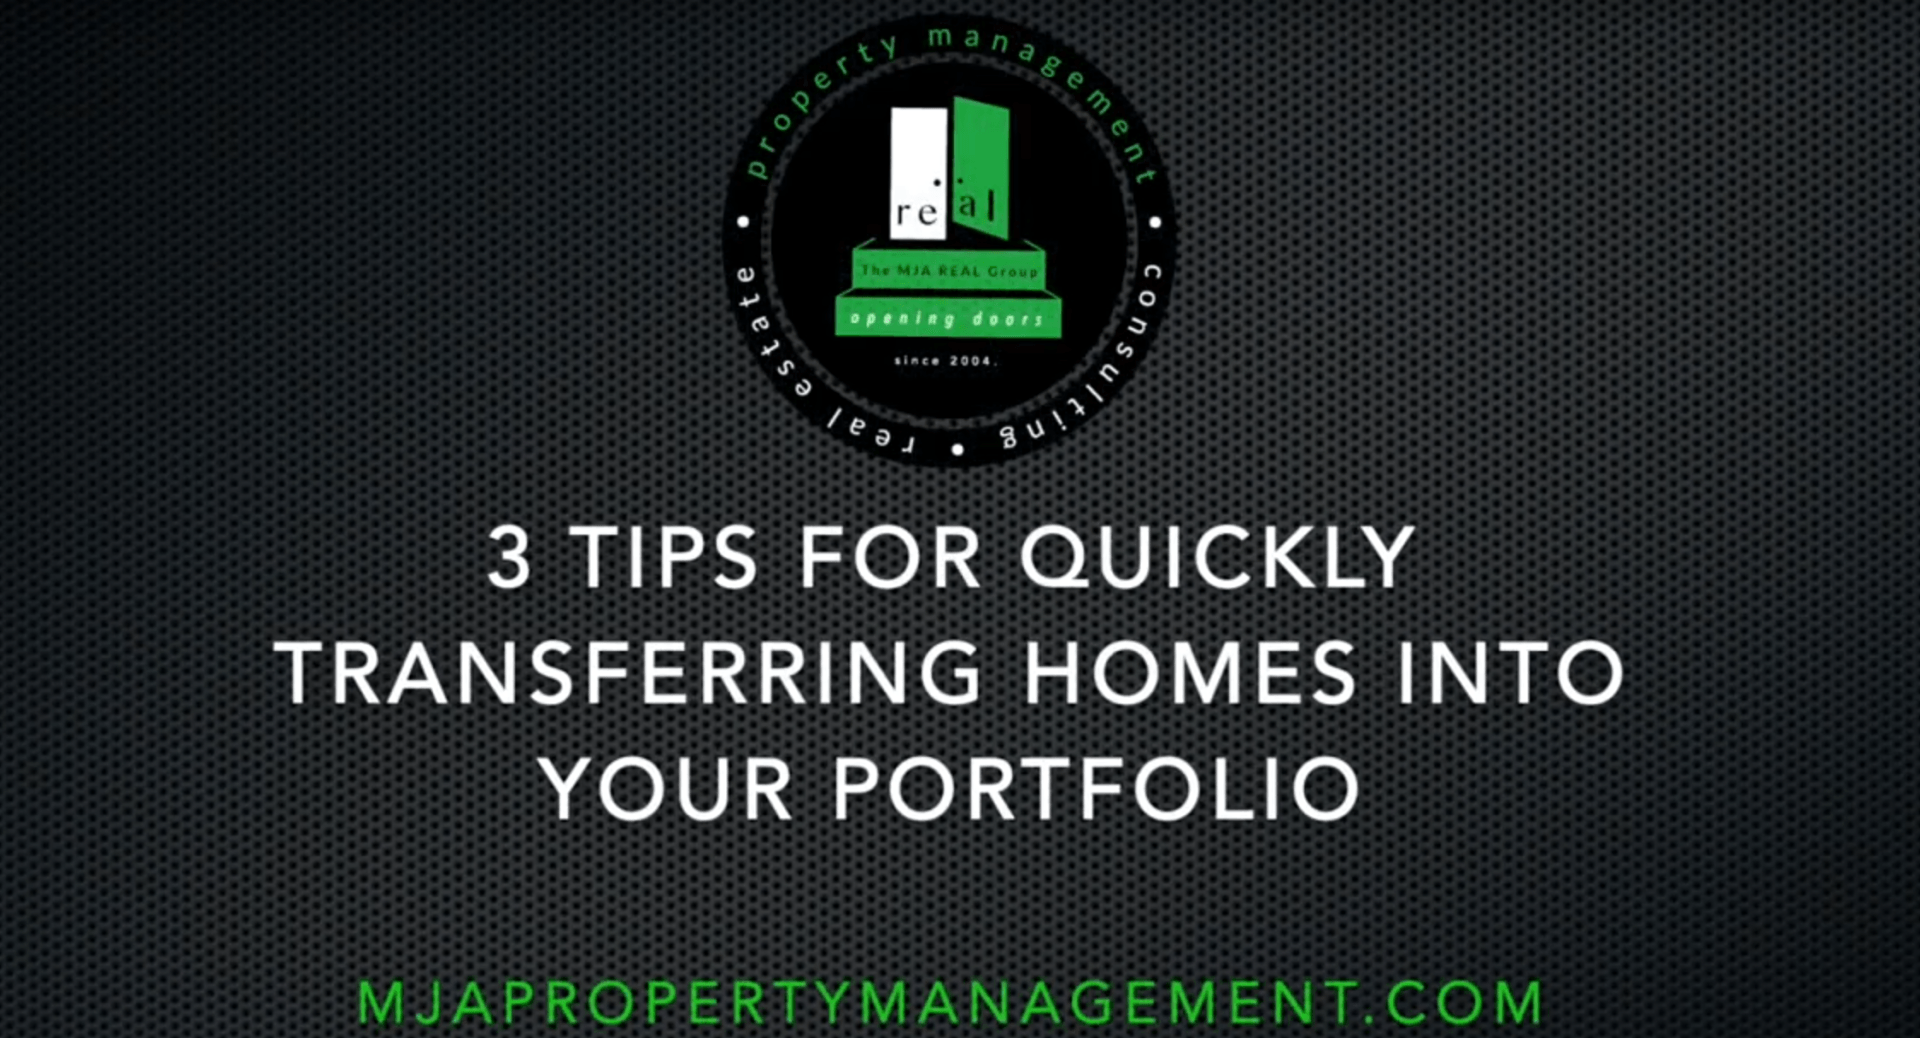 VIDEO TIP! HOW TO QUICKLY TRANSFER HOMES INTO YOUR PORTFOLIO